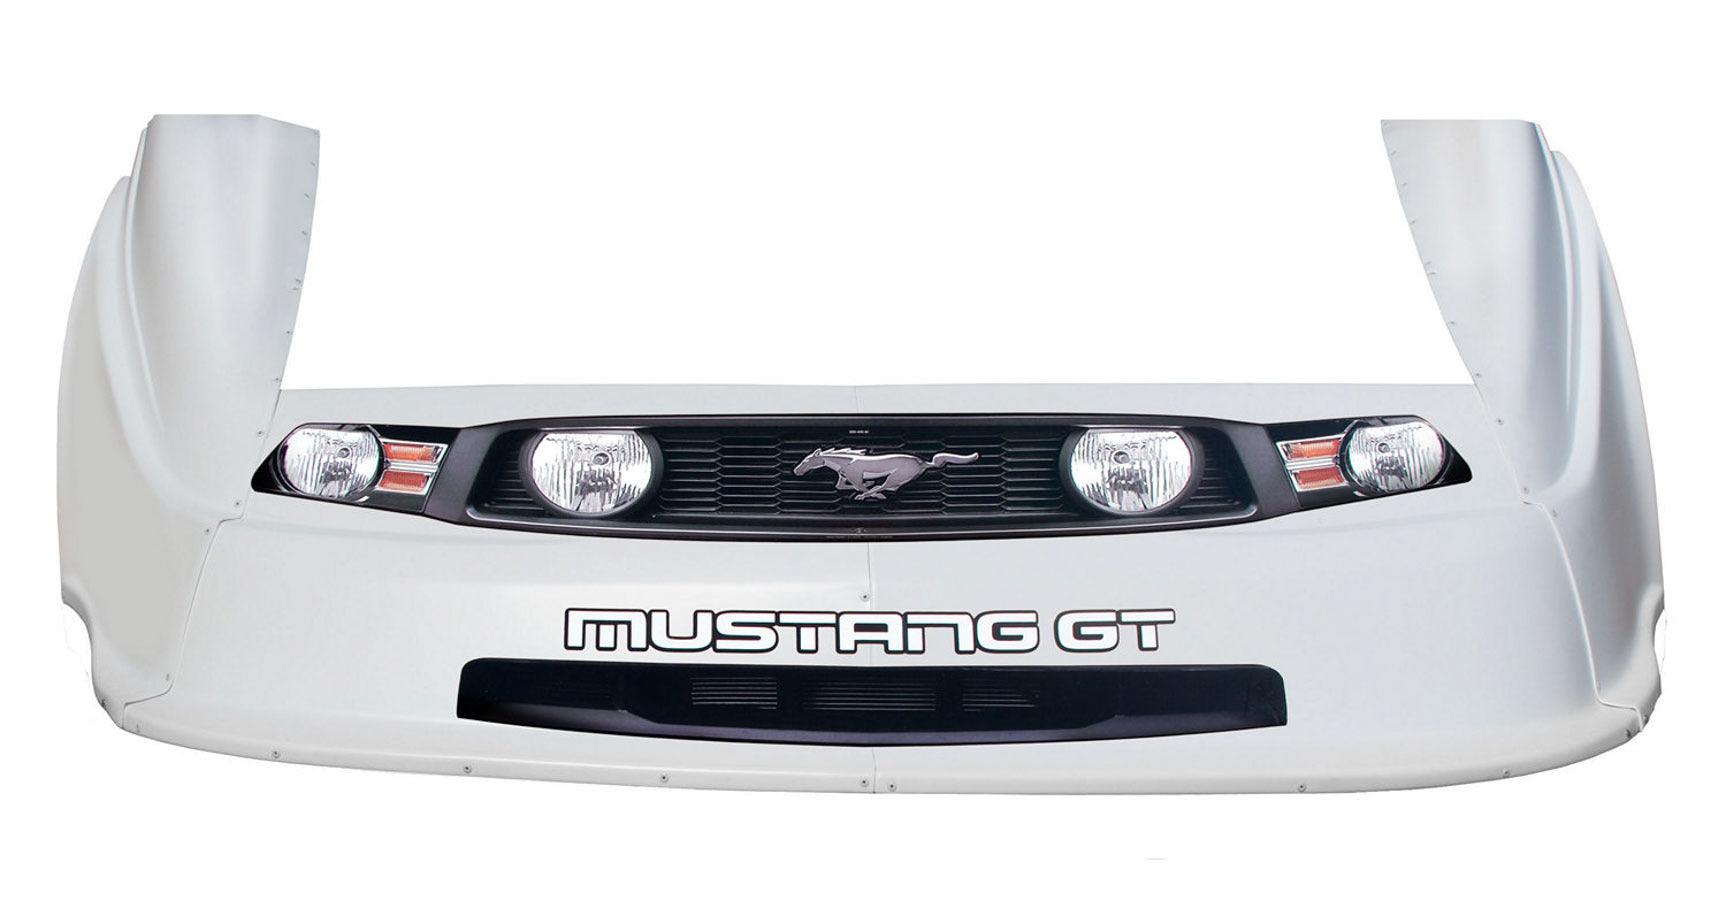 Dirt MD3 Combo White 2010 Mustang - Burlile Performance Products